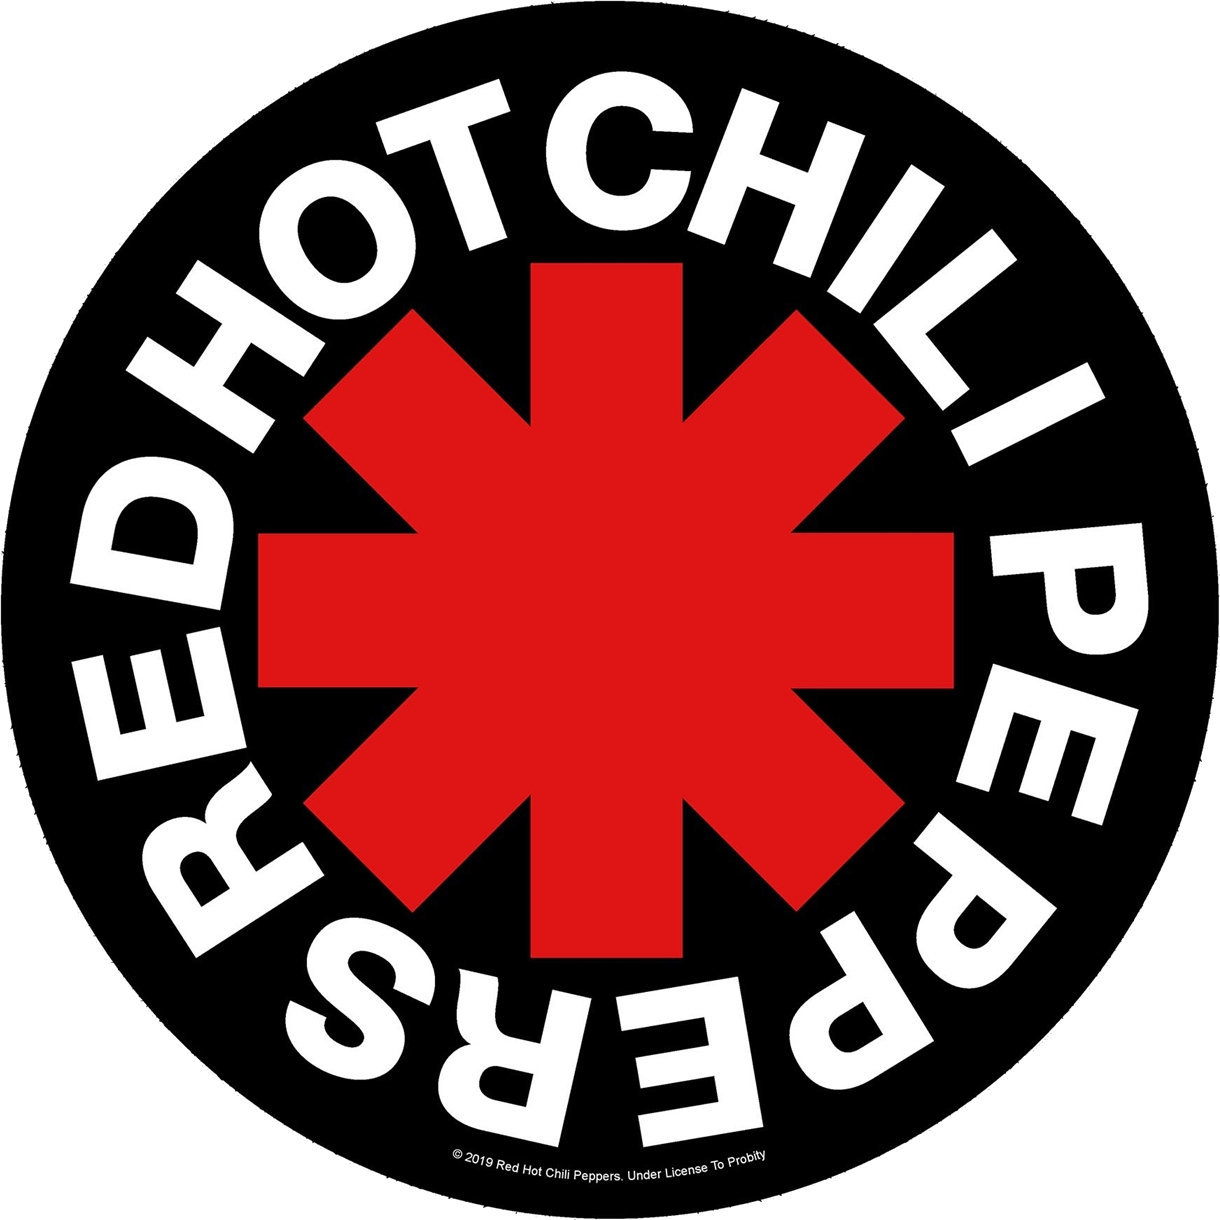 Parche Red Hot Chili Peppers Asterisk Parche